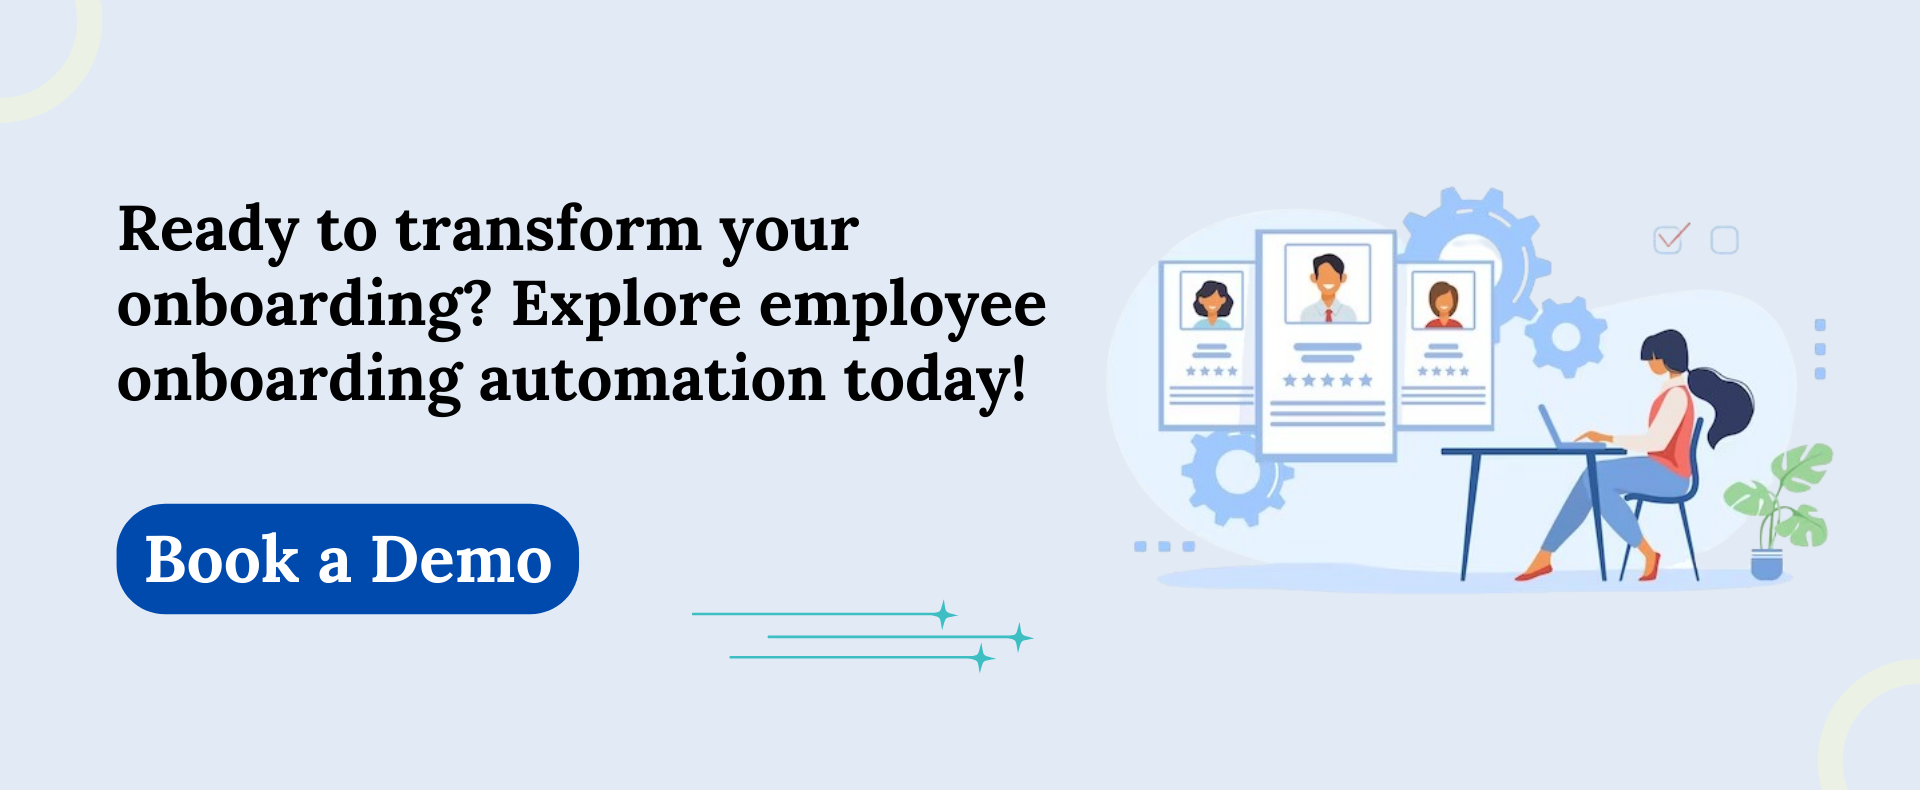 benefits-of-automate-onboarding-process-IB1.png